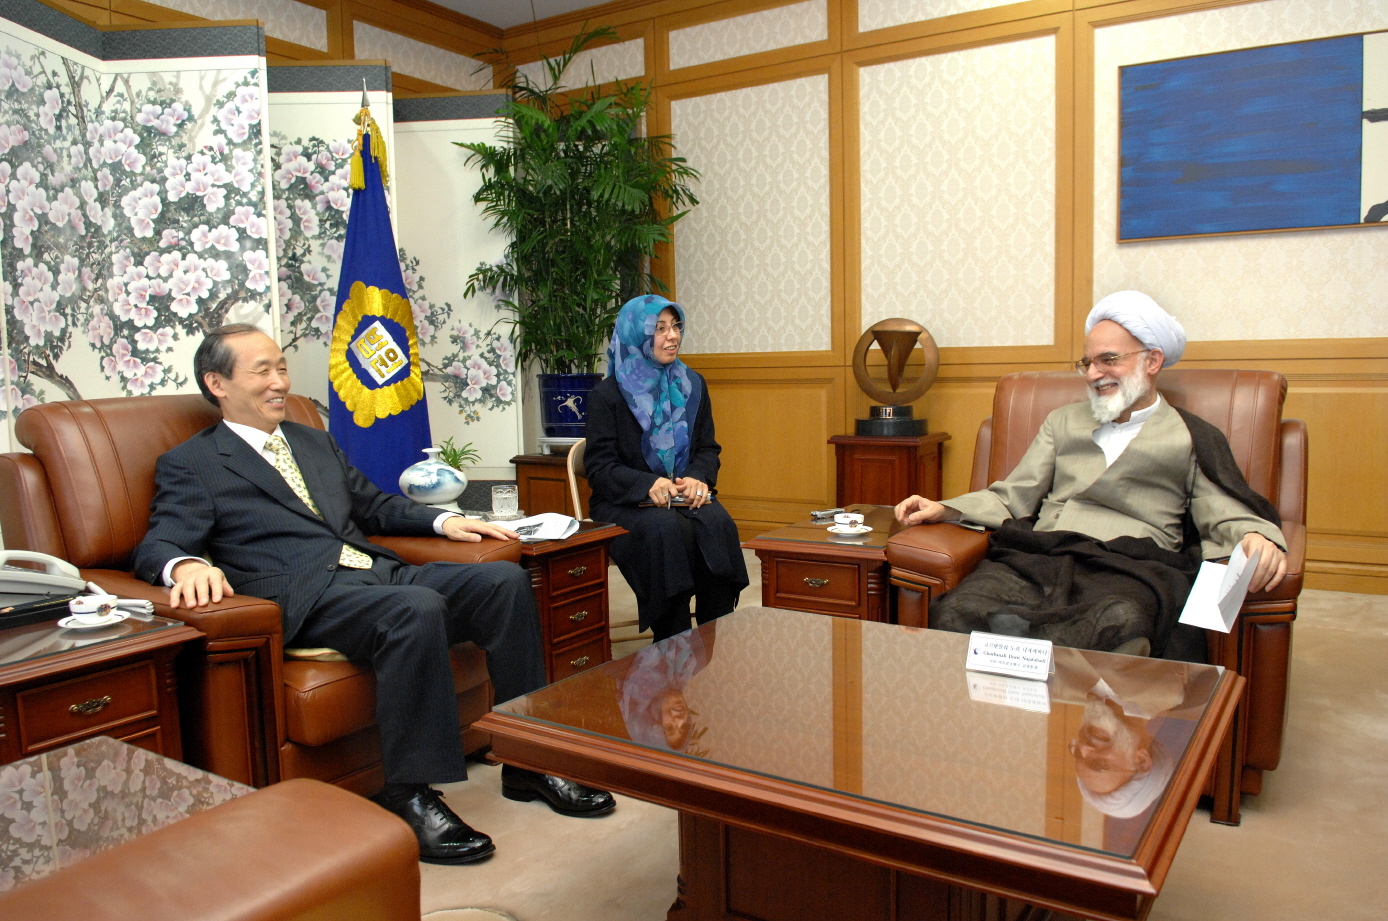 [06_13_08]Prosecutor General of Iran makes an official visit to the Supreme Court